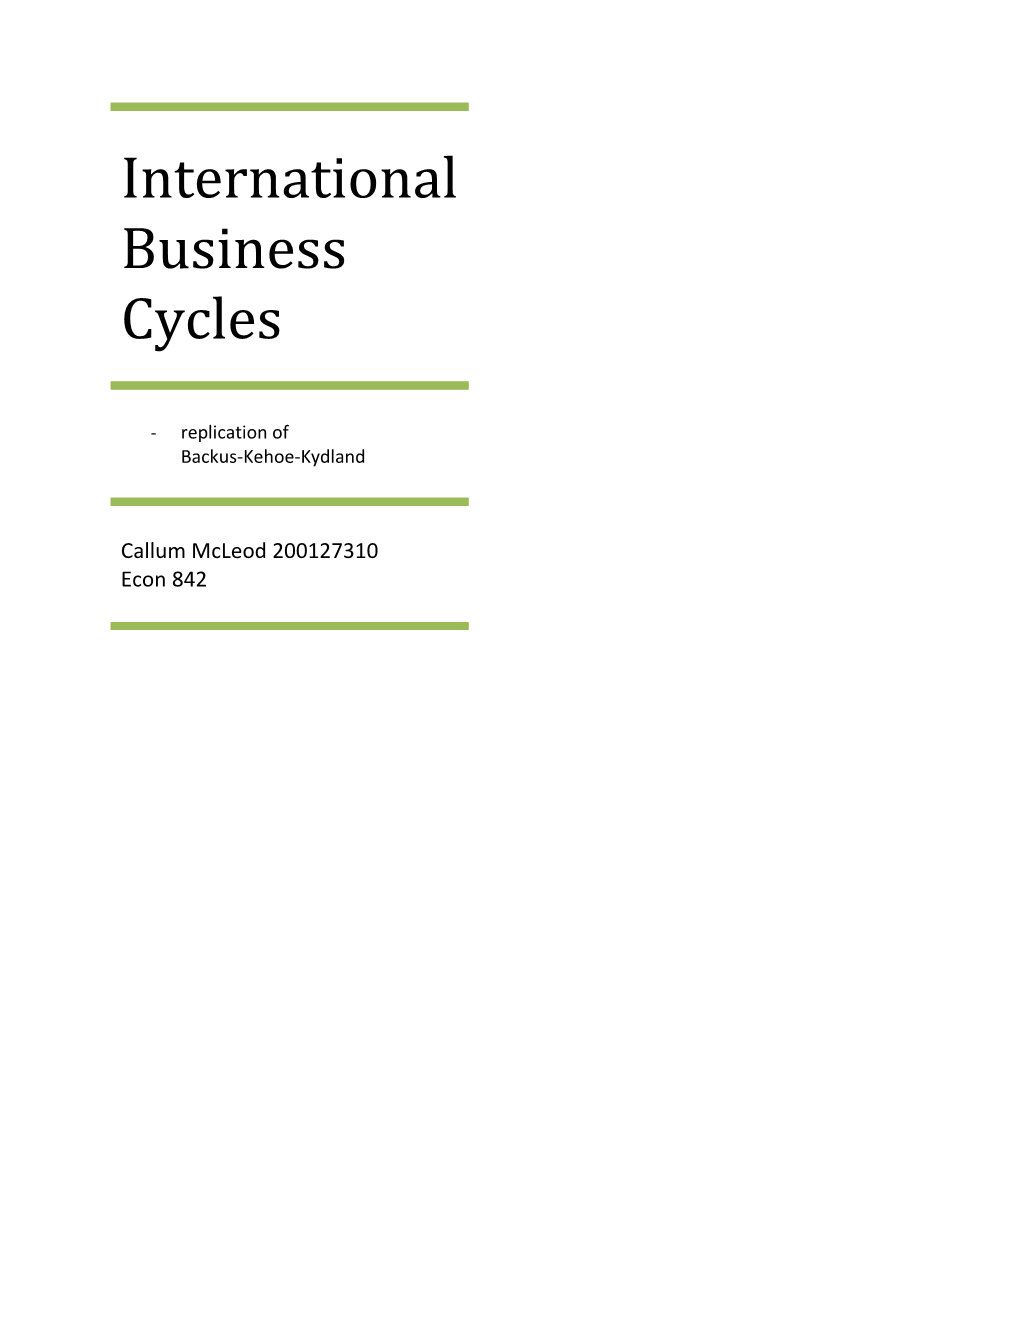 International Business Cycles